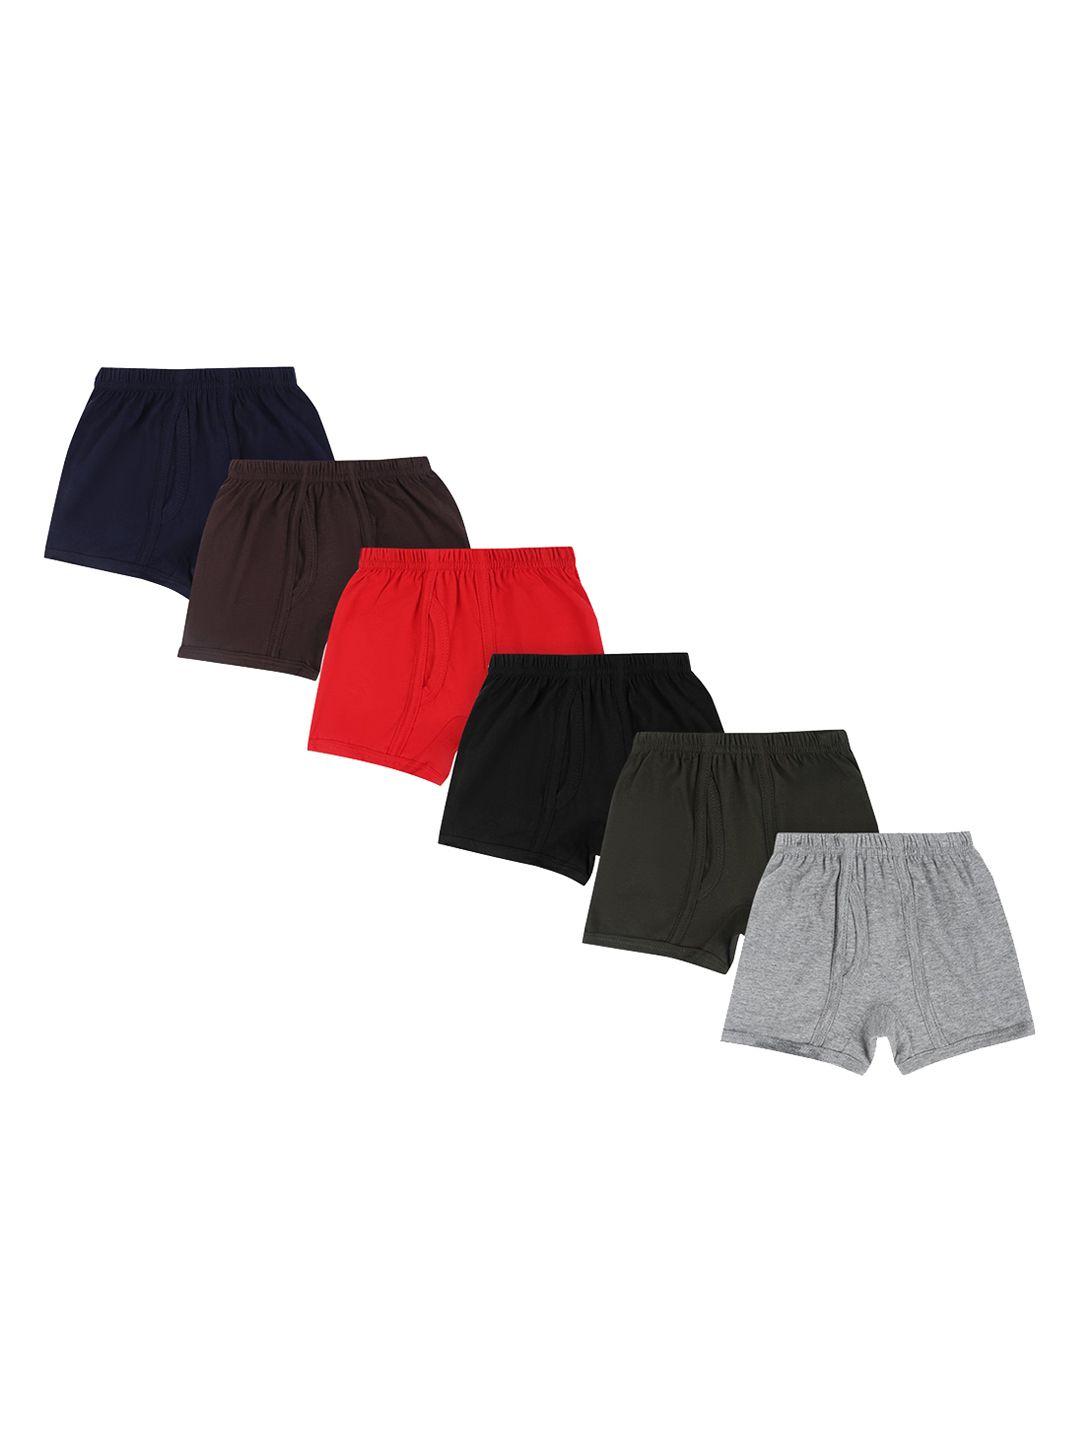 dyca boys pack of 6 assorted cotton trunks